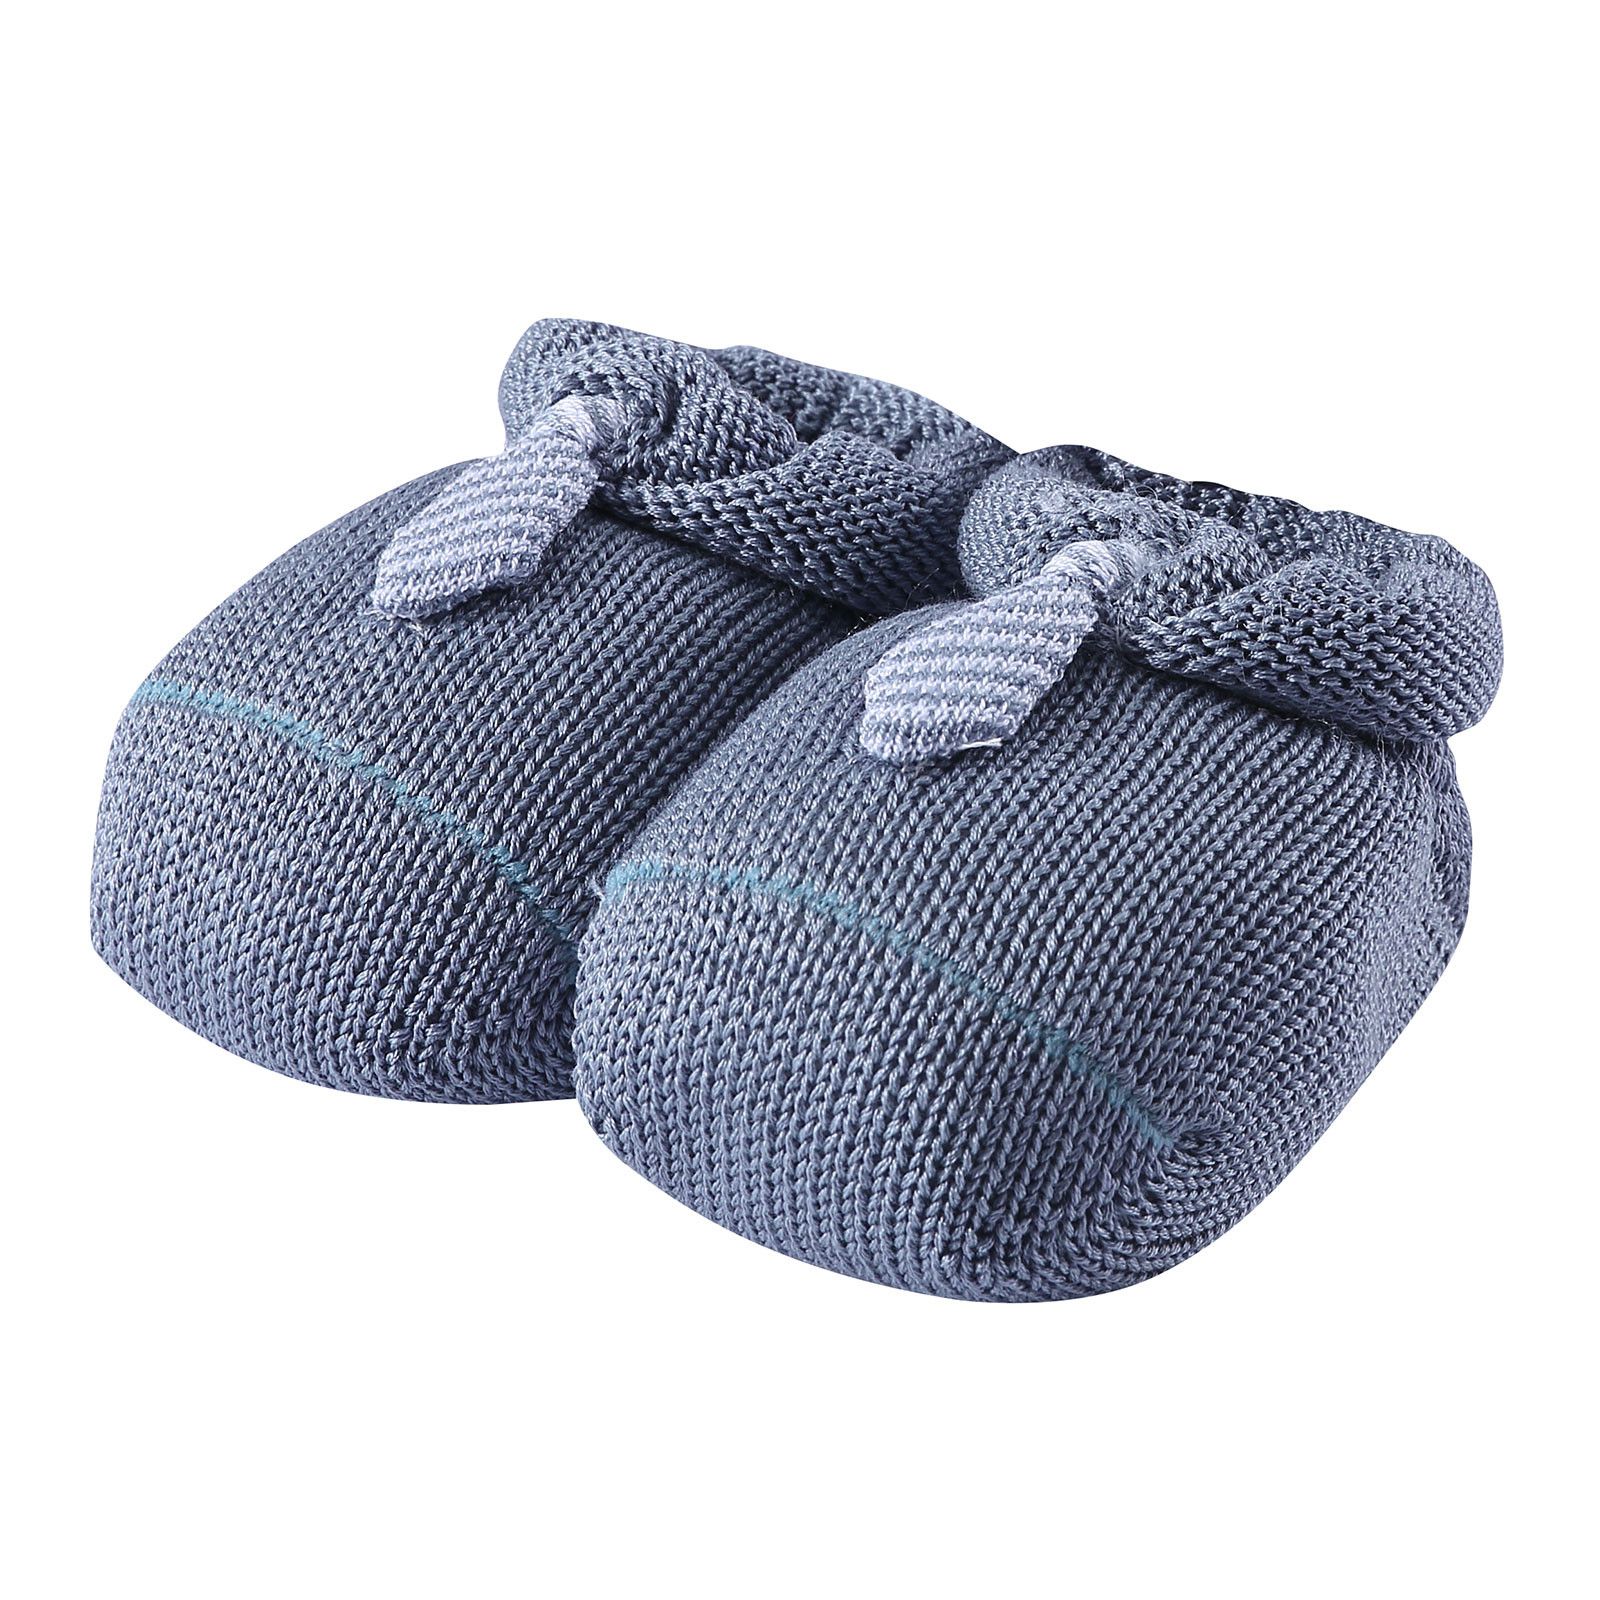 Baby Grey Knitted Cotton Shoes With Blue Tie Trims - CÉMAROSE | Children's Fashion Store - 1